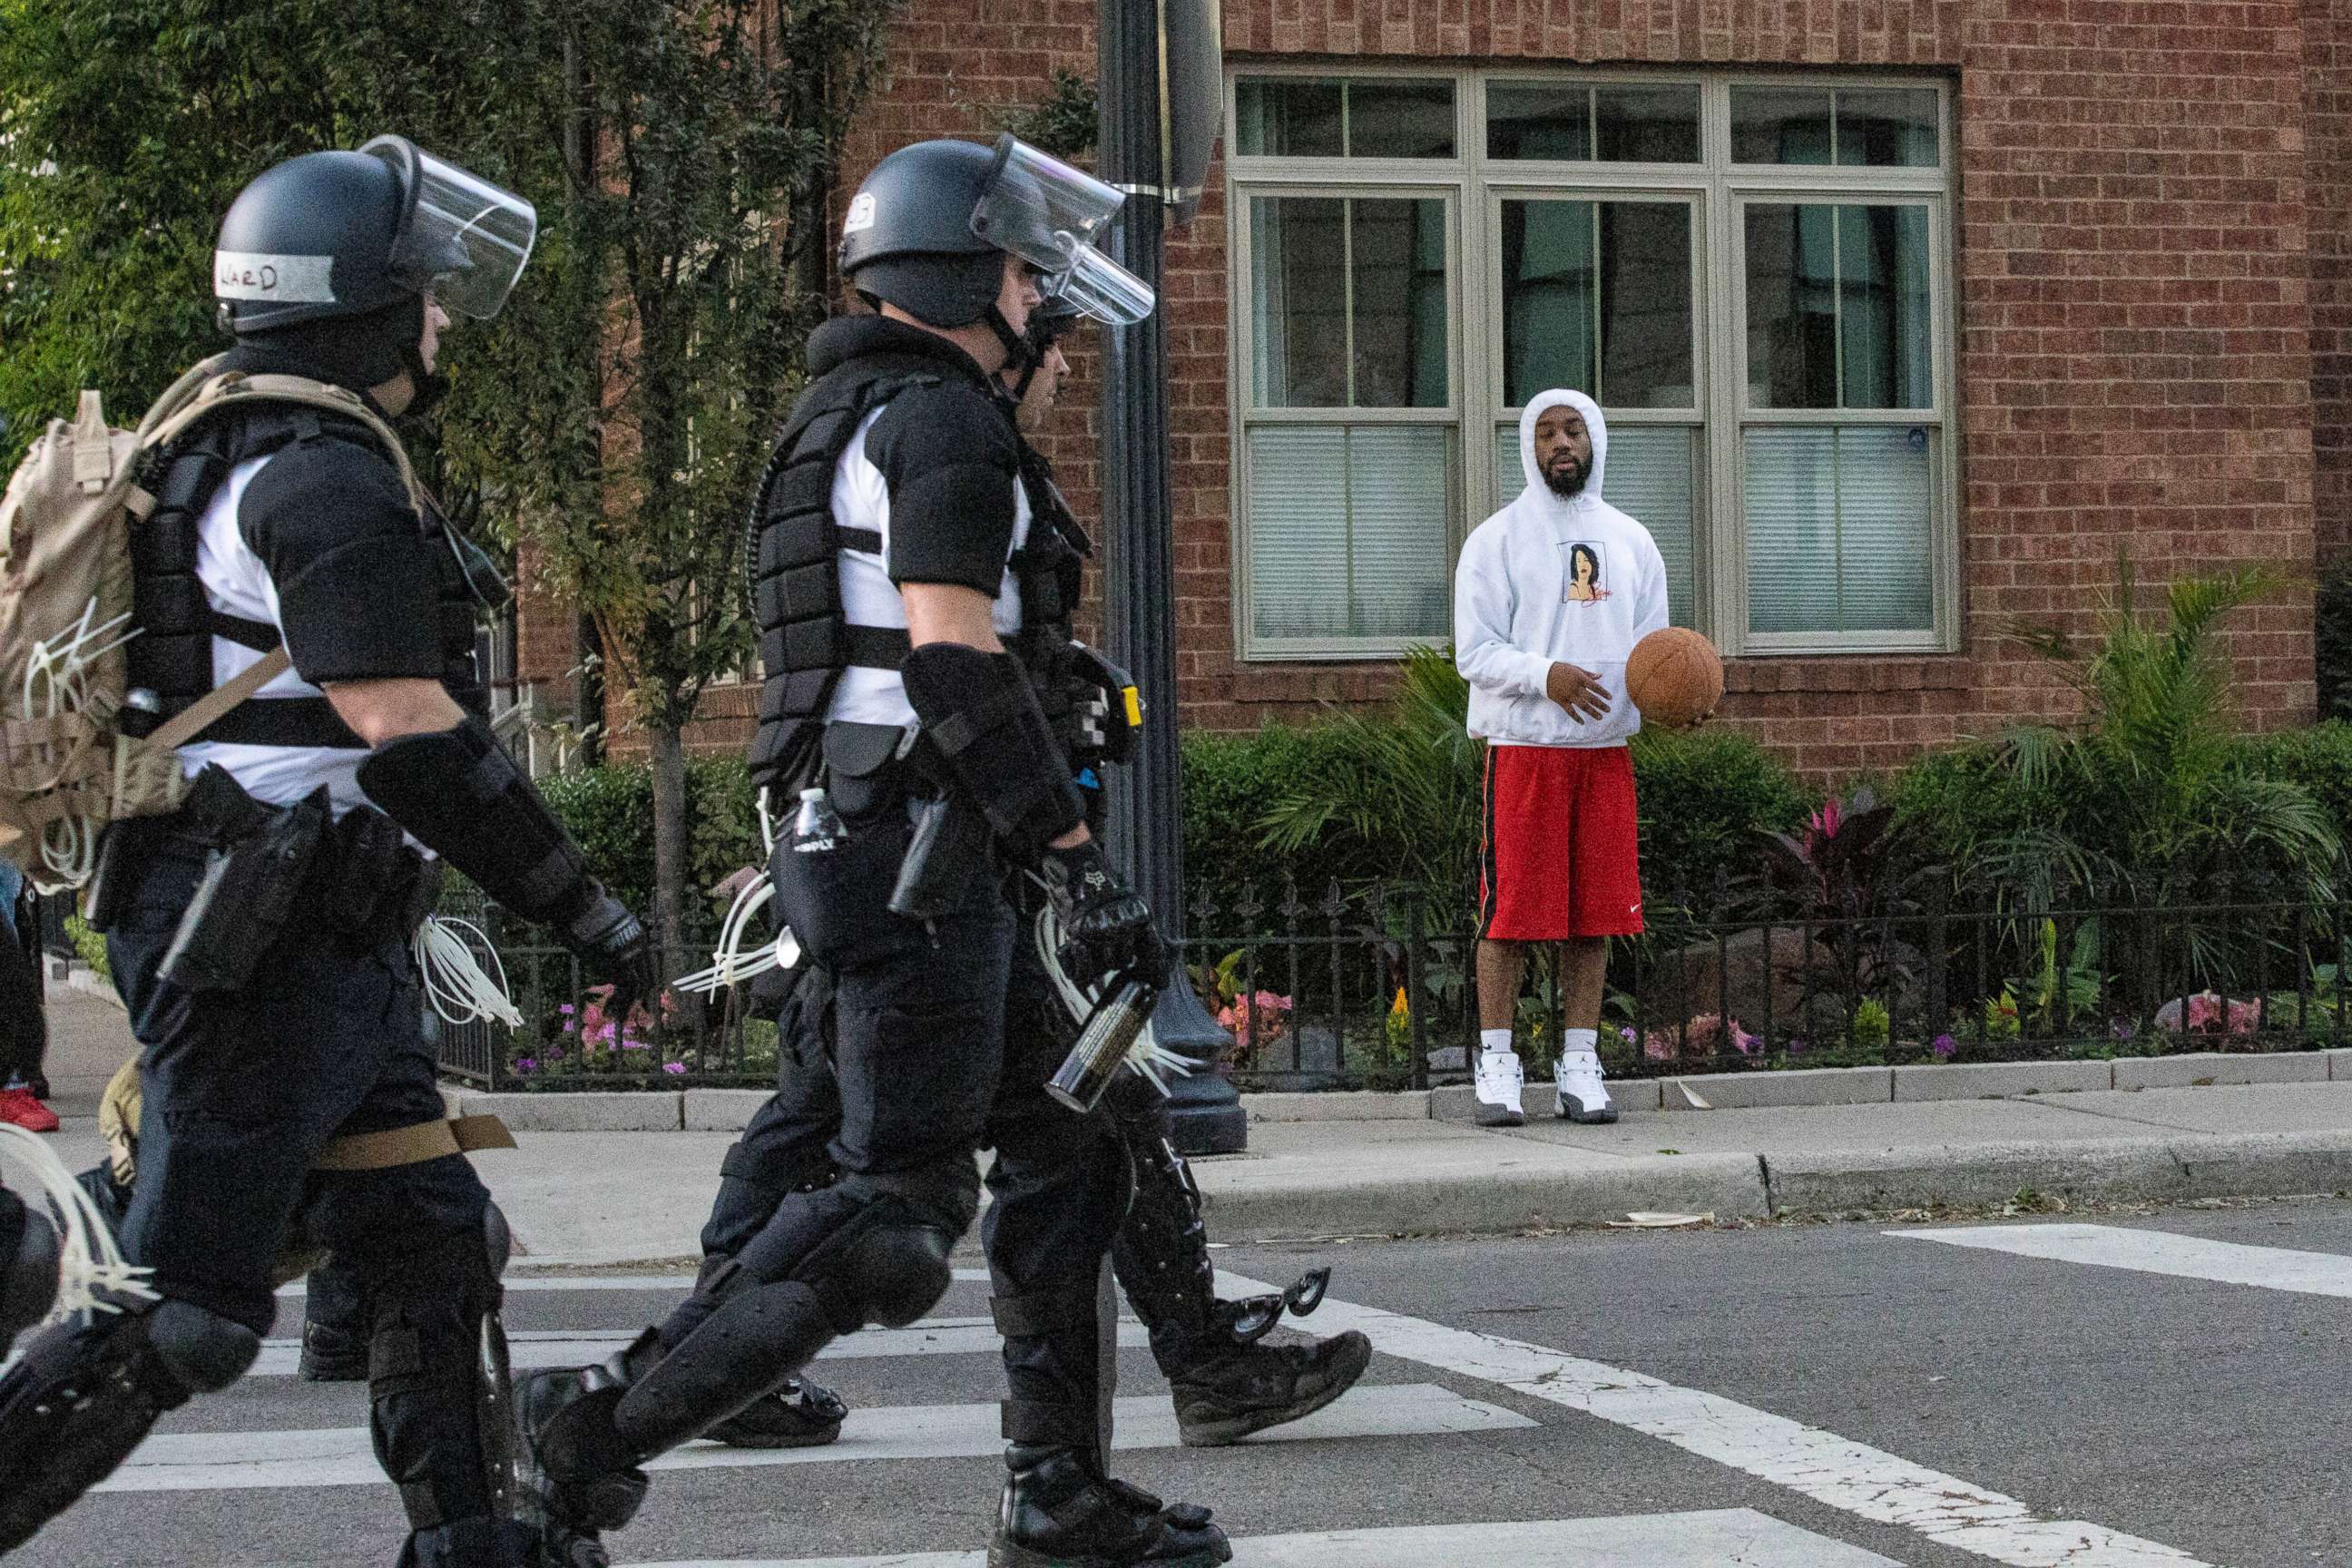 PHOTO: A group of police officers in riot gear walk down the street in Columbus, Ohio, during a demonstration in response to the death of George Floyd at the hands of a Minneapolis police officer, May 30, 2020.